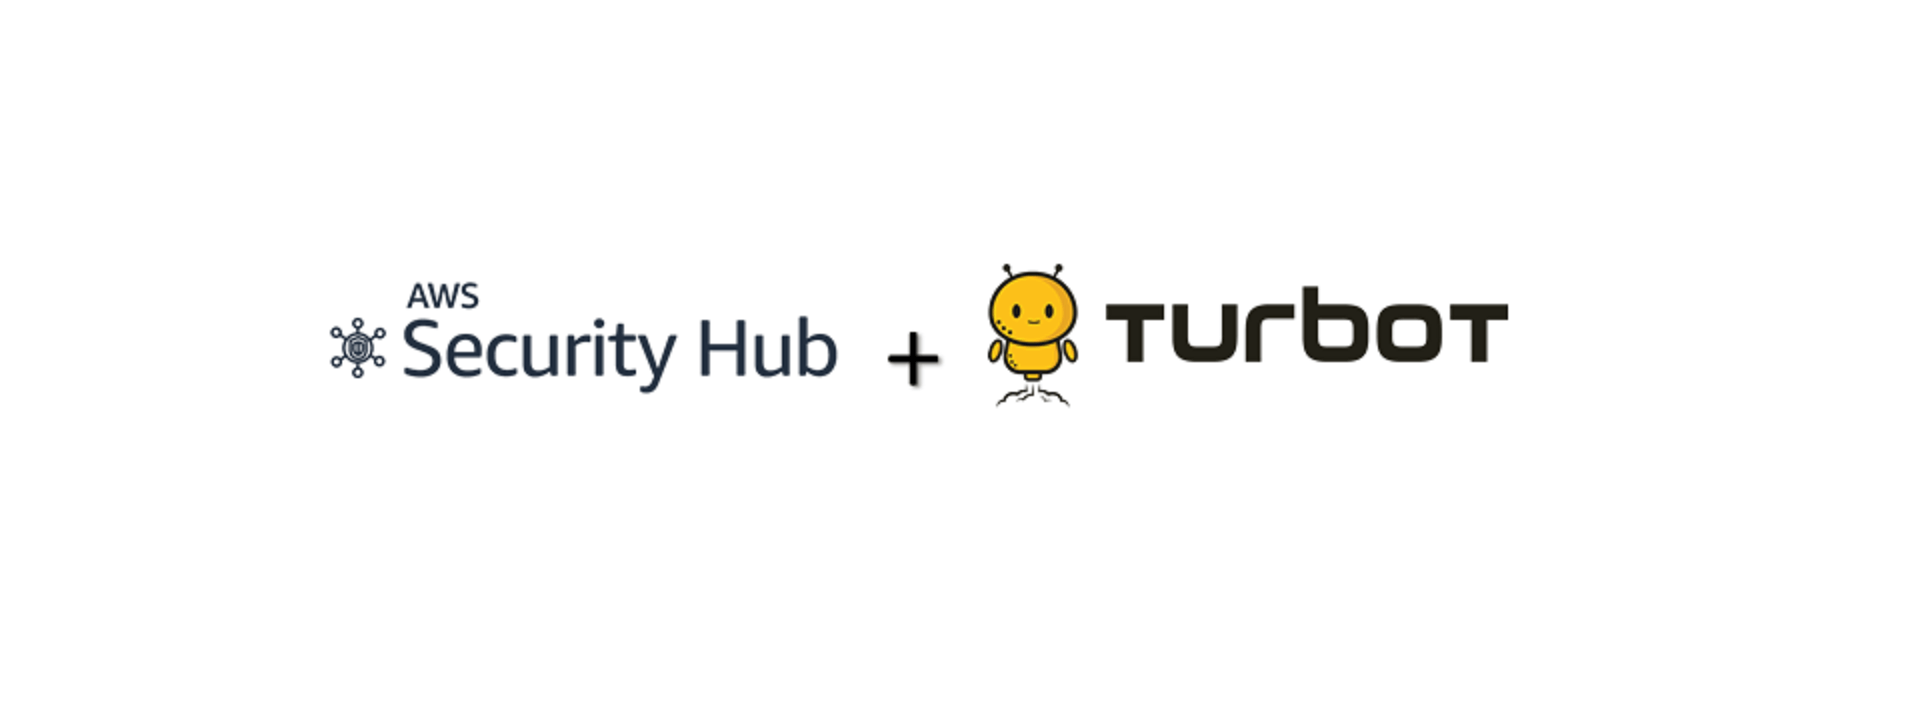 Turbot has recently expanded our Guardrail policies for AWS Security Hub announced today during the AWS Reinvent 2018 Keynote.